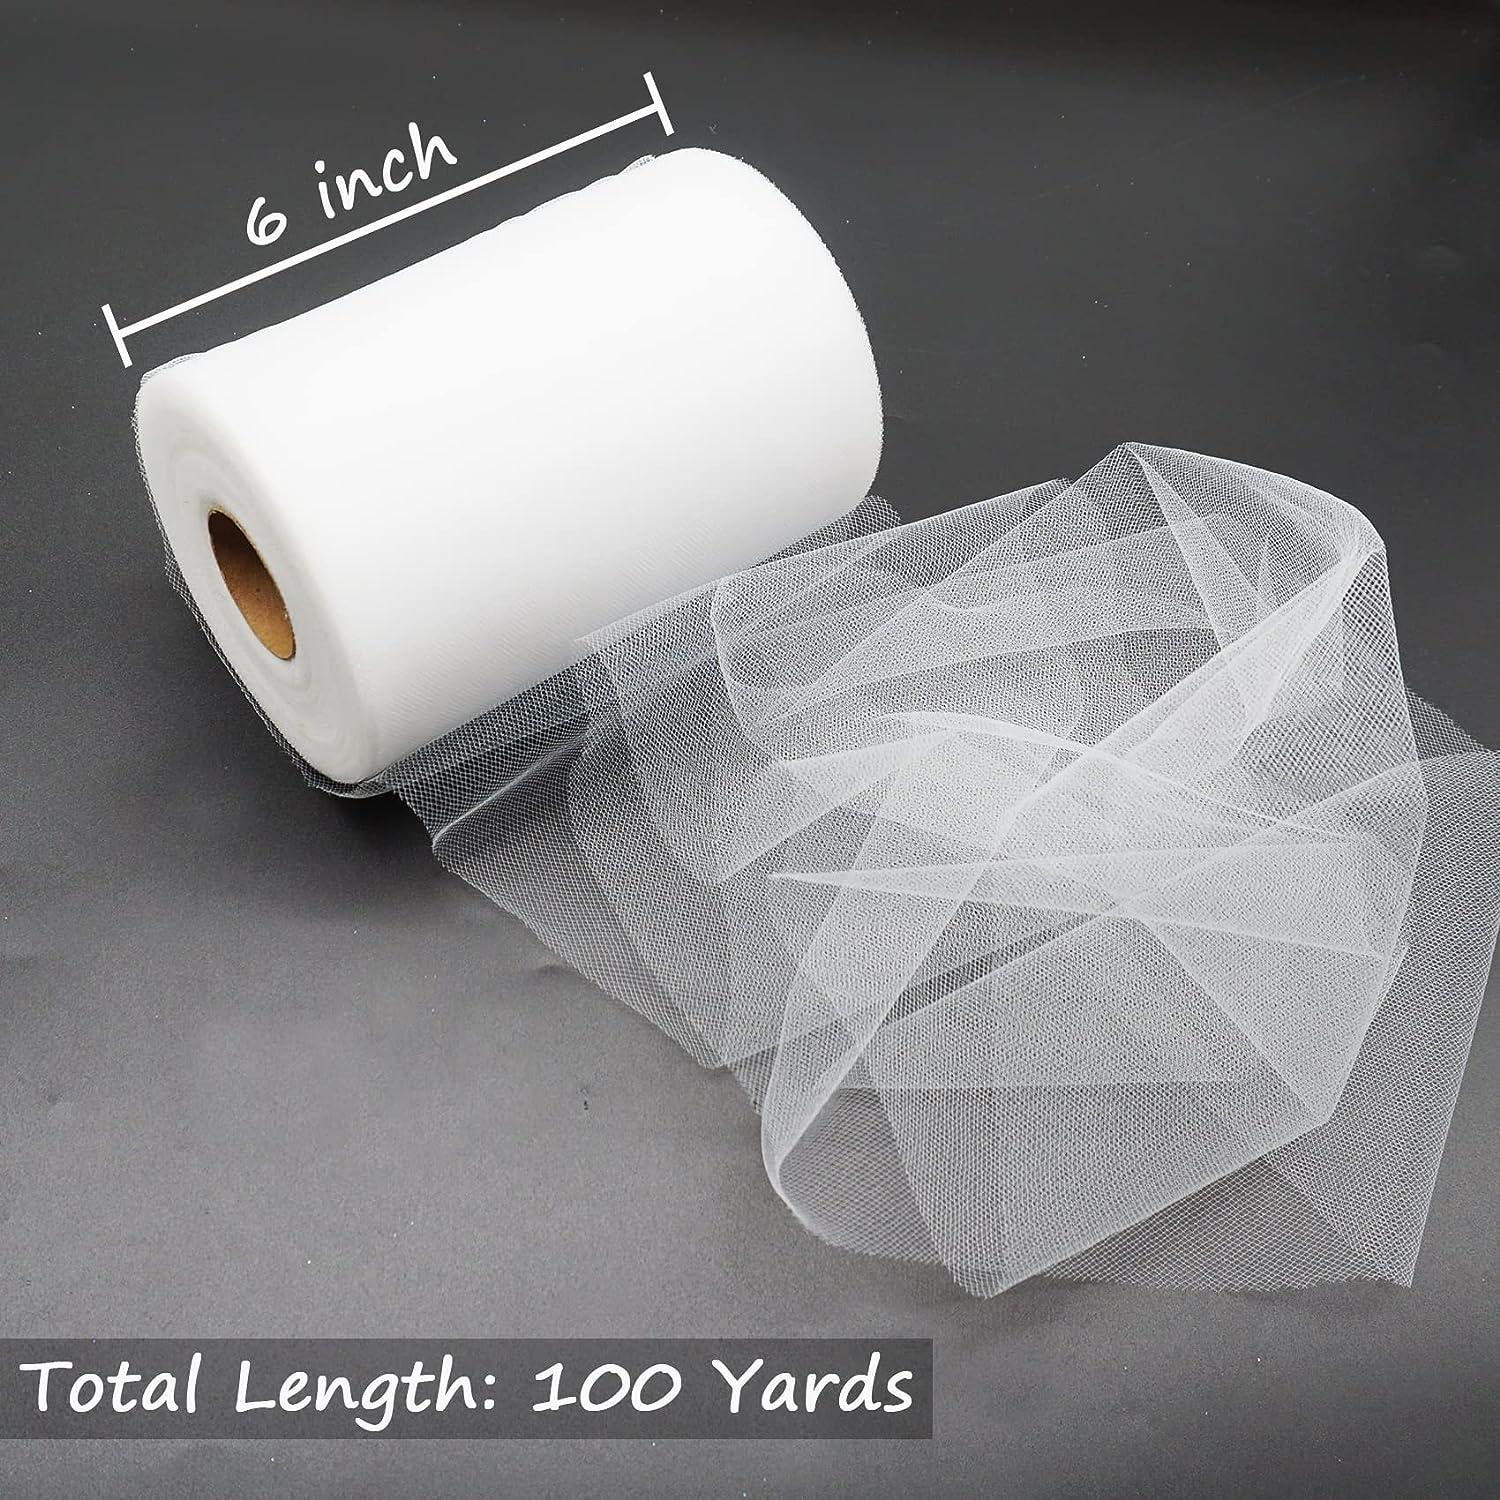 OLYCRAFT 2x1.6m White Tulle Fabrics Chiffon Sheer Crepe Fabric Gauze Mesh  Bolt Net Chinlon Tulle for Gift Wrapping DIY Sewing Crafts Wedding Party